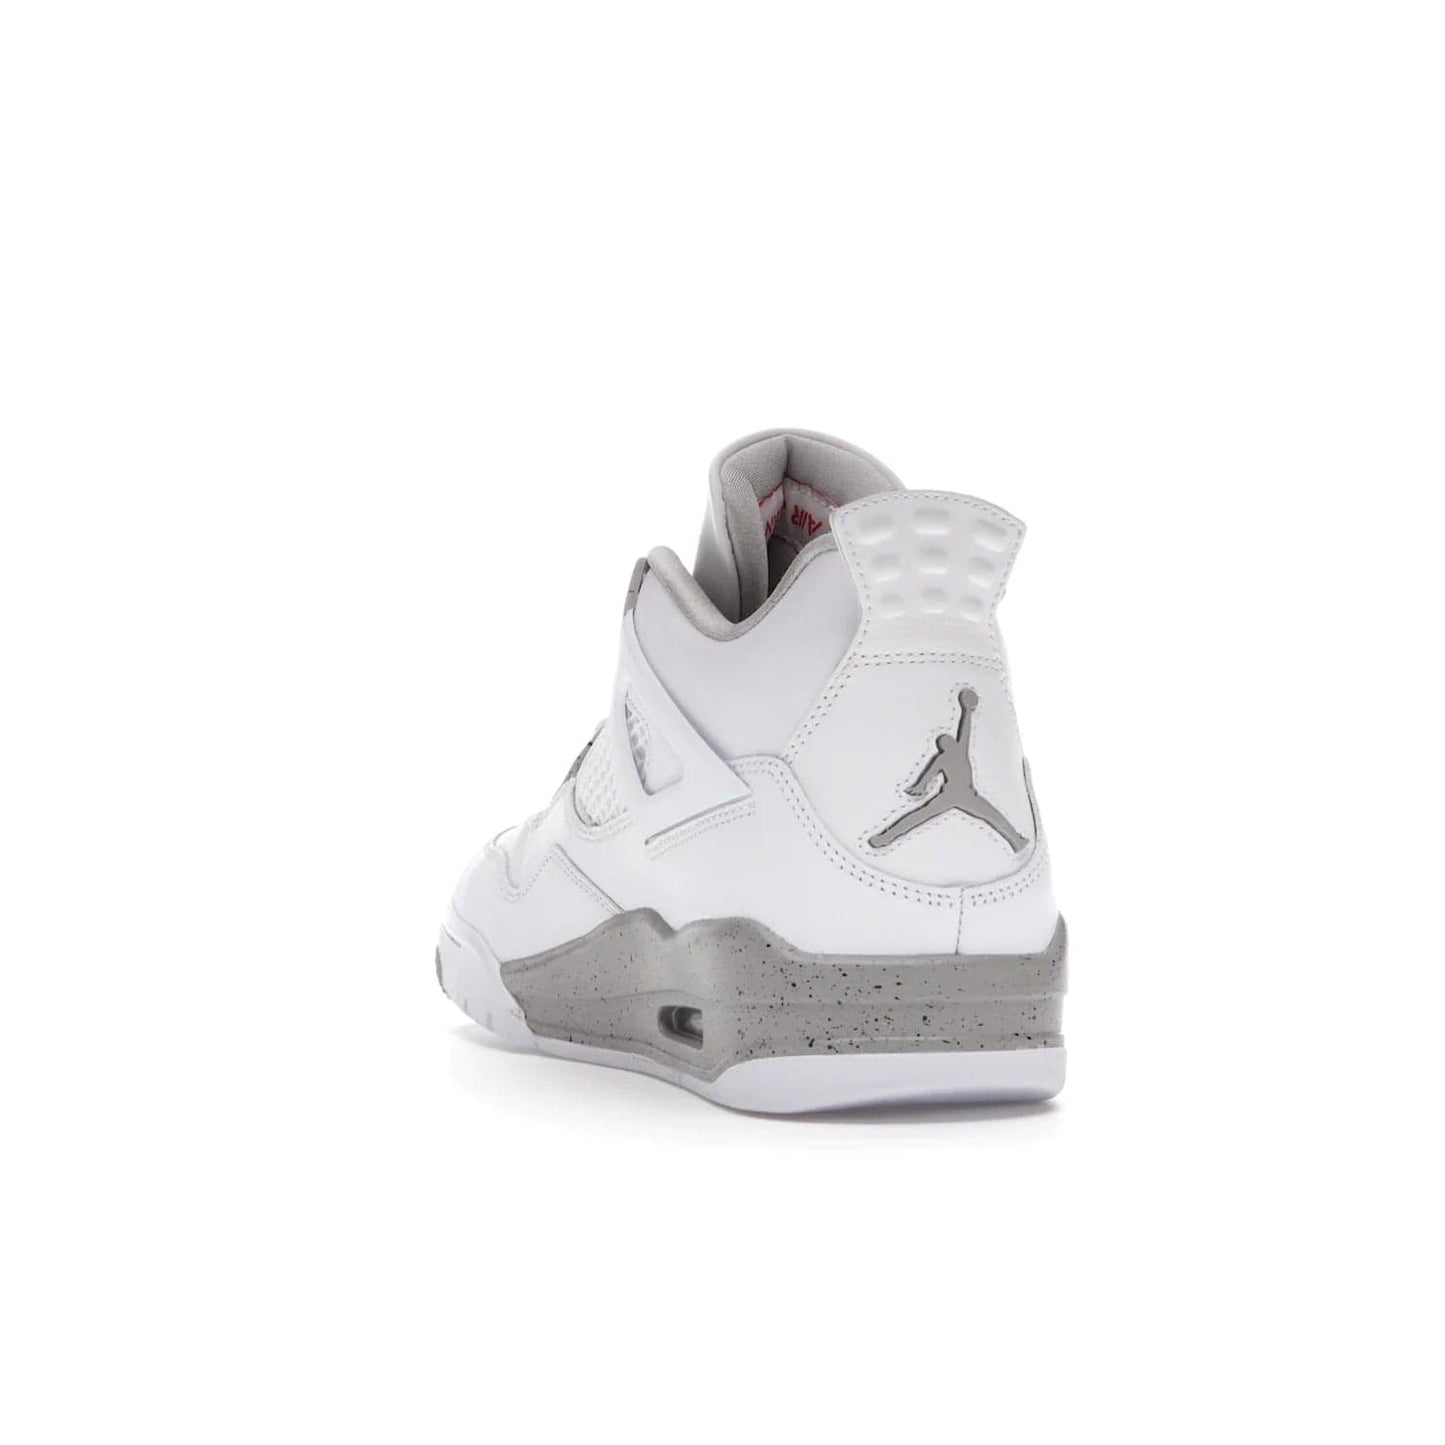 Jordan 4 Retro White Oreo (2021) - Image 26 - Only at www.BallersClubKickz.com - Update your sneaker style with the Air Jordan 4 Retro White Oreo. Limited-edition sneaker features white leather and mesh upper, Tech Grey eyelets and midsole, Jumpman logo embroidered on the tongue, and more. Released exclusively on Saturday, July 3rd.